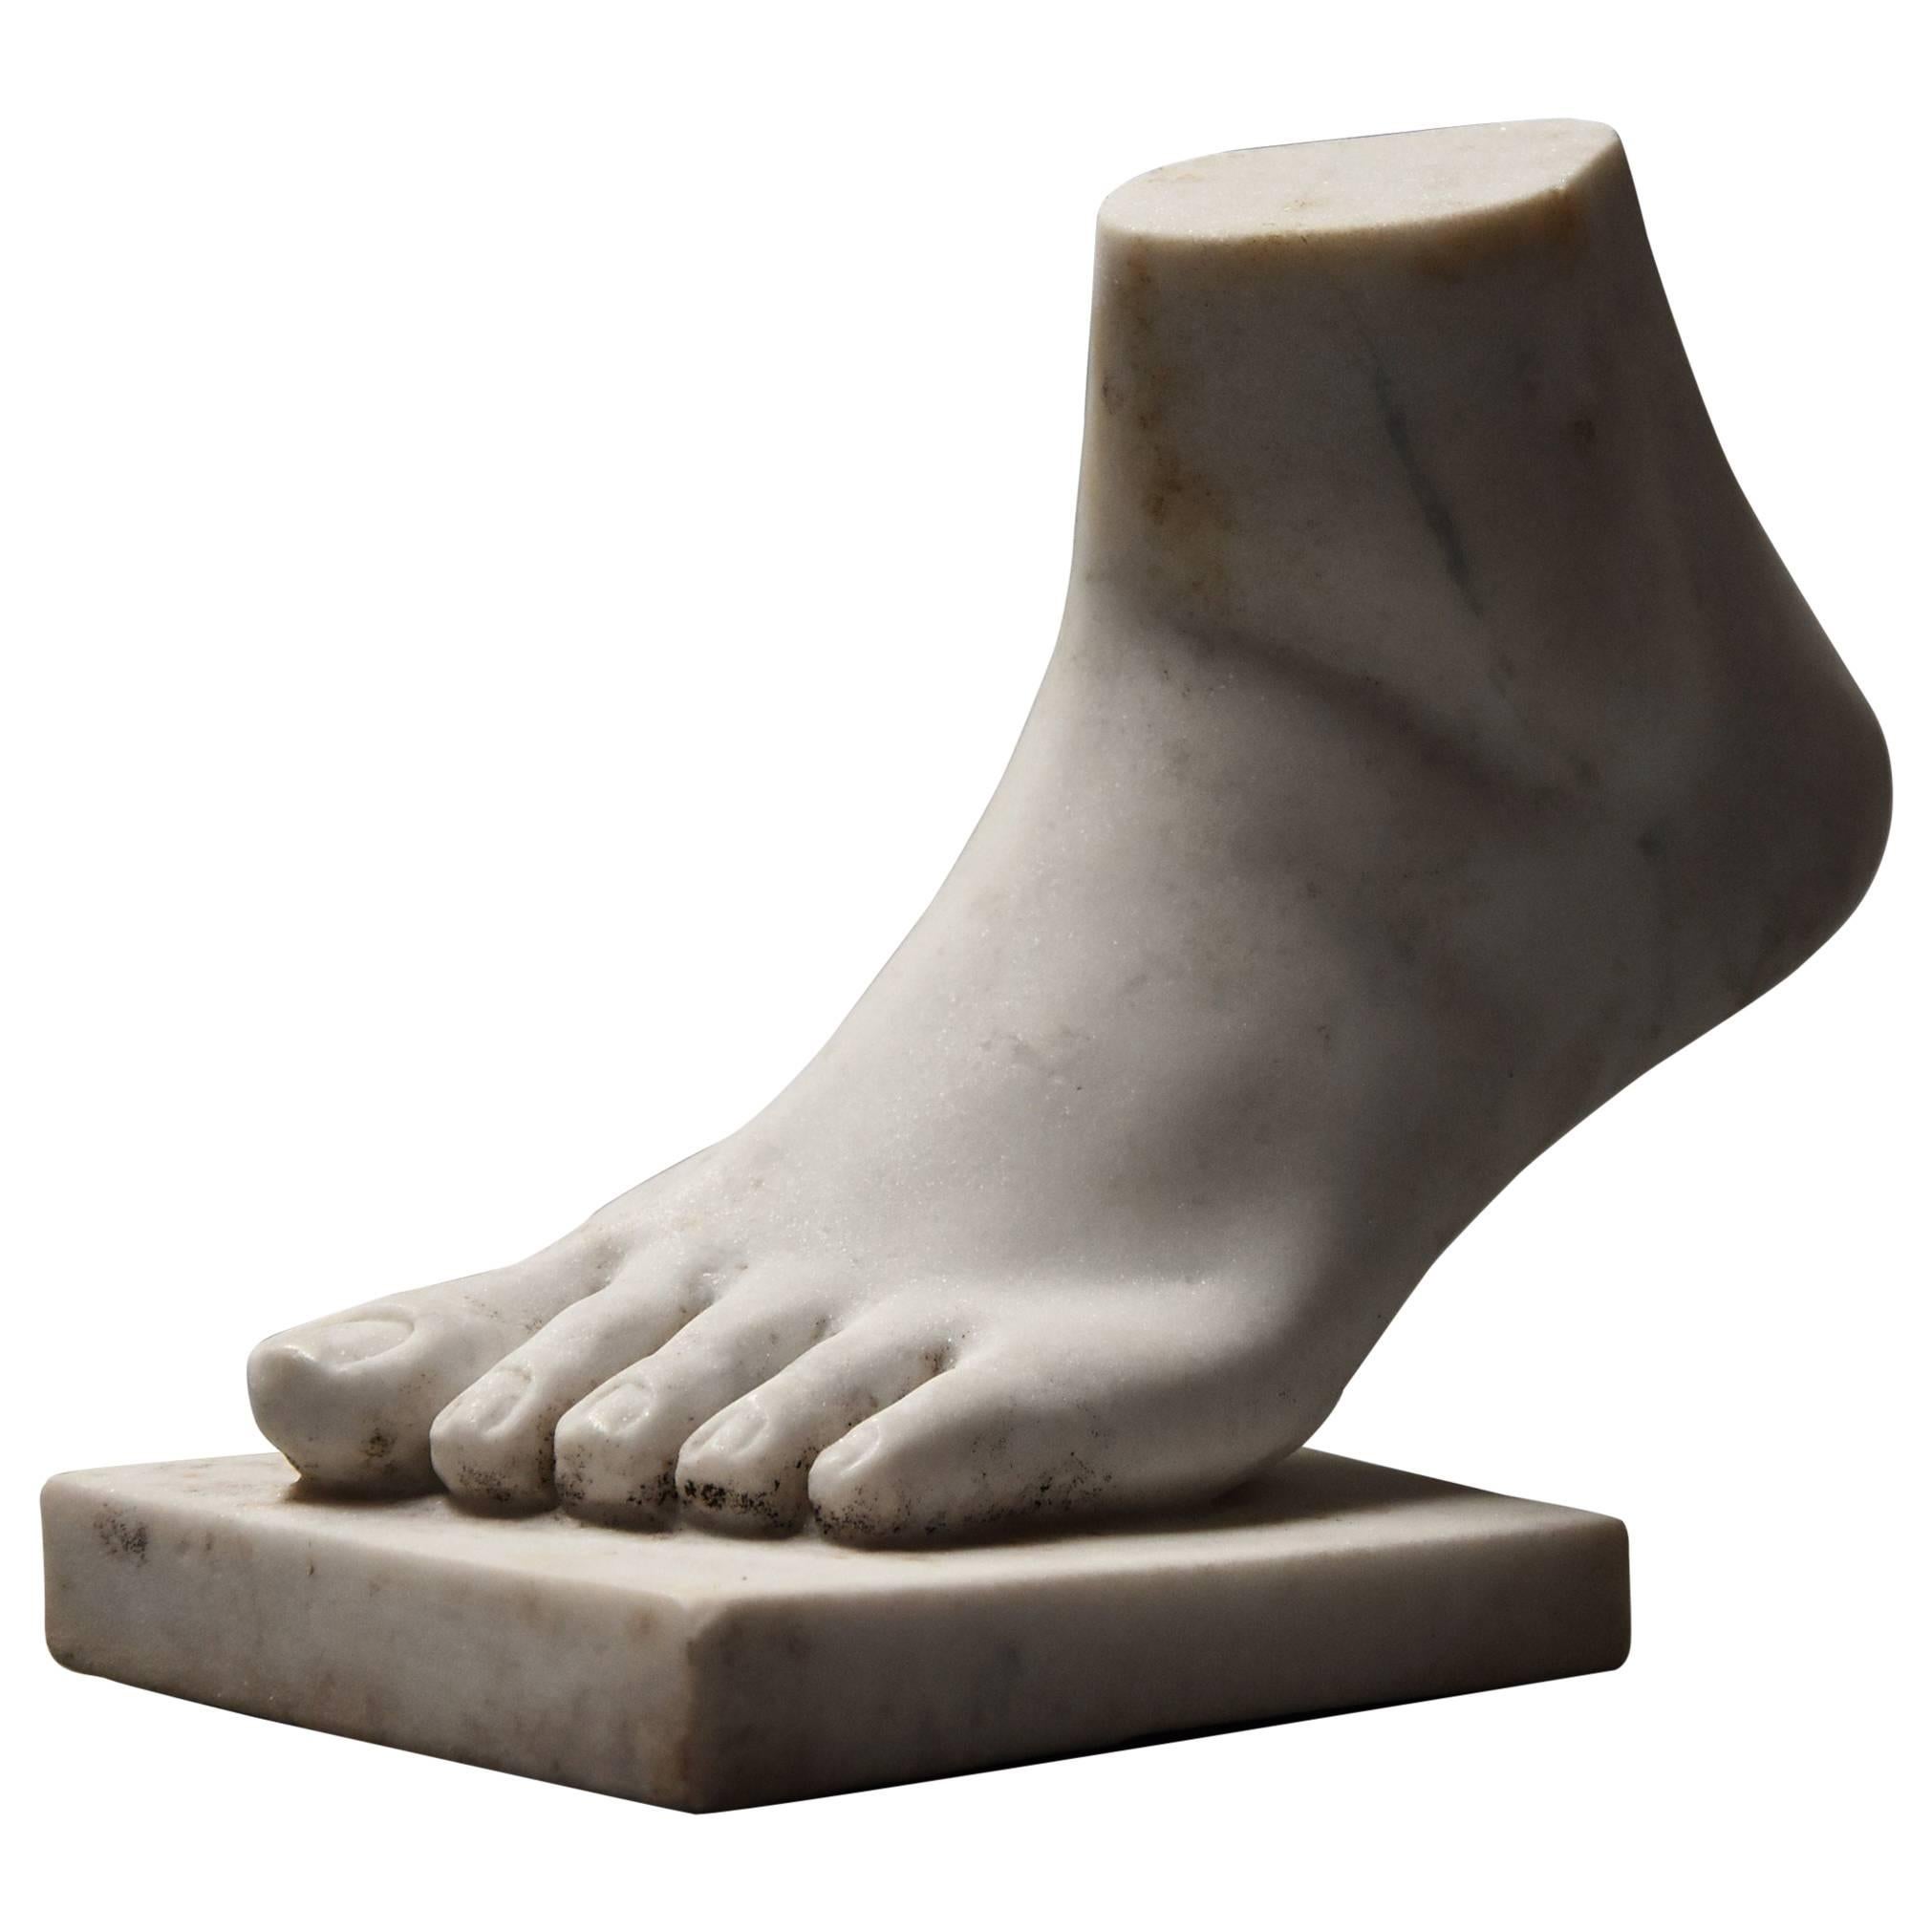 Late 19th Century Grand Tour Style Marble Sculpture of a Foot, after the Antique